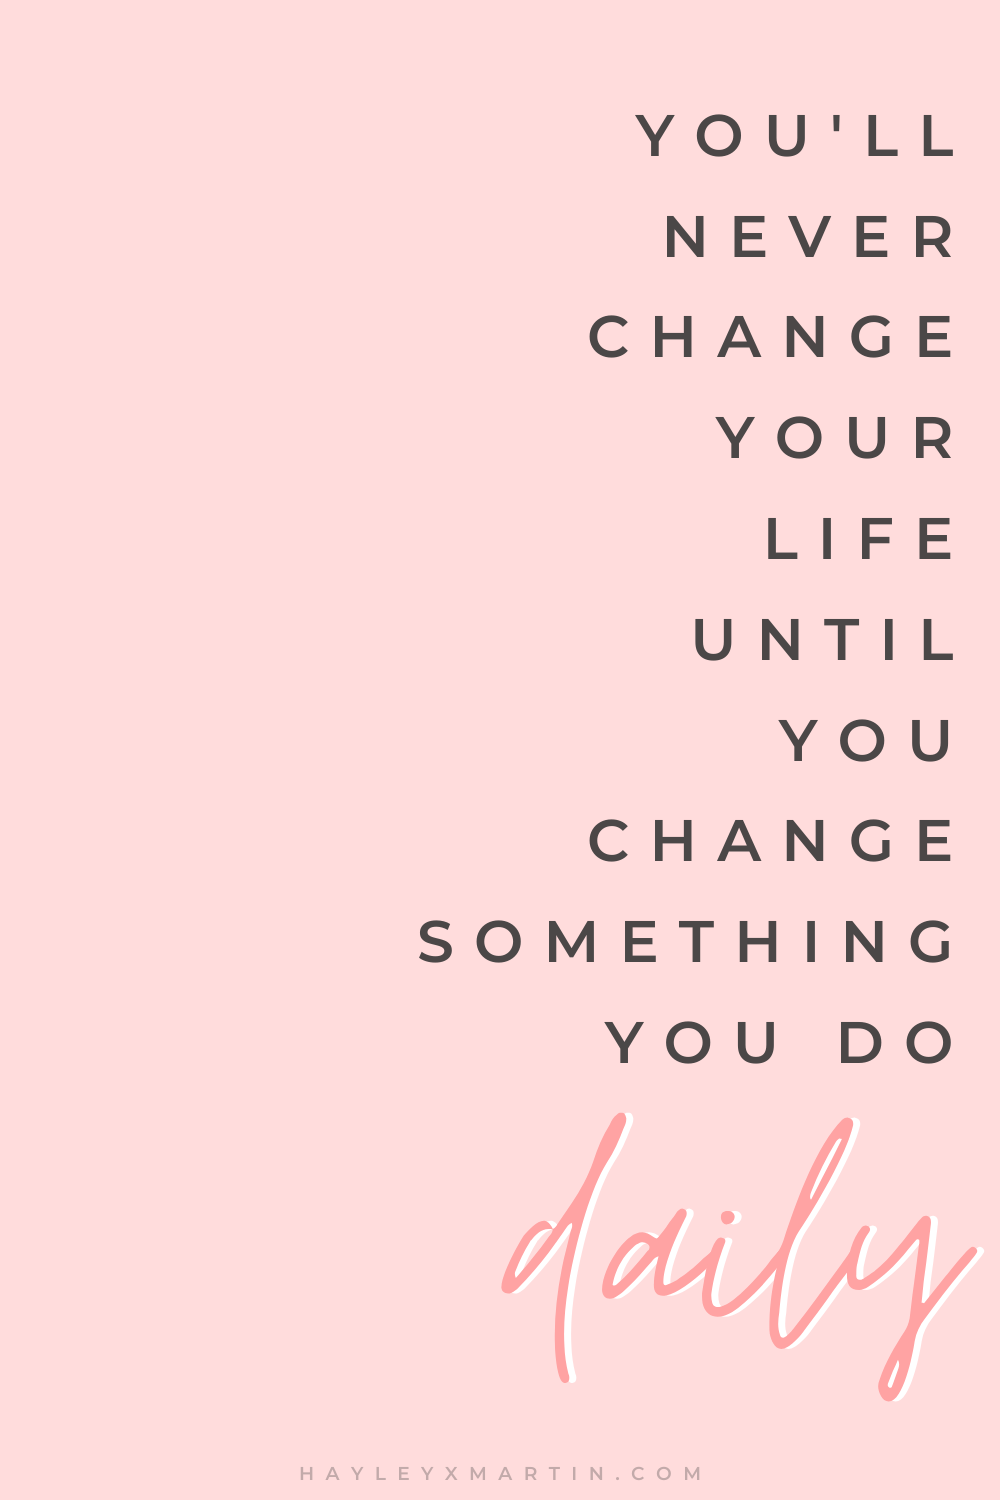 YOU’LL-NEVER-CHANGE-YOUR-LIFE-UNTIL-YOU-CHANGE-SOMETHING-YOU-DO-DAILY ...